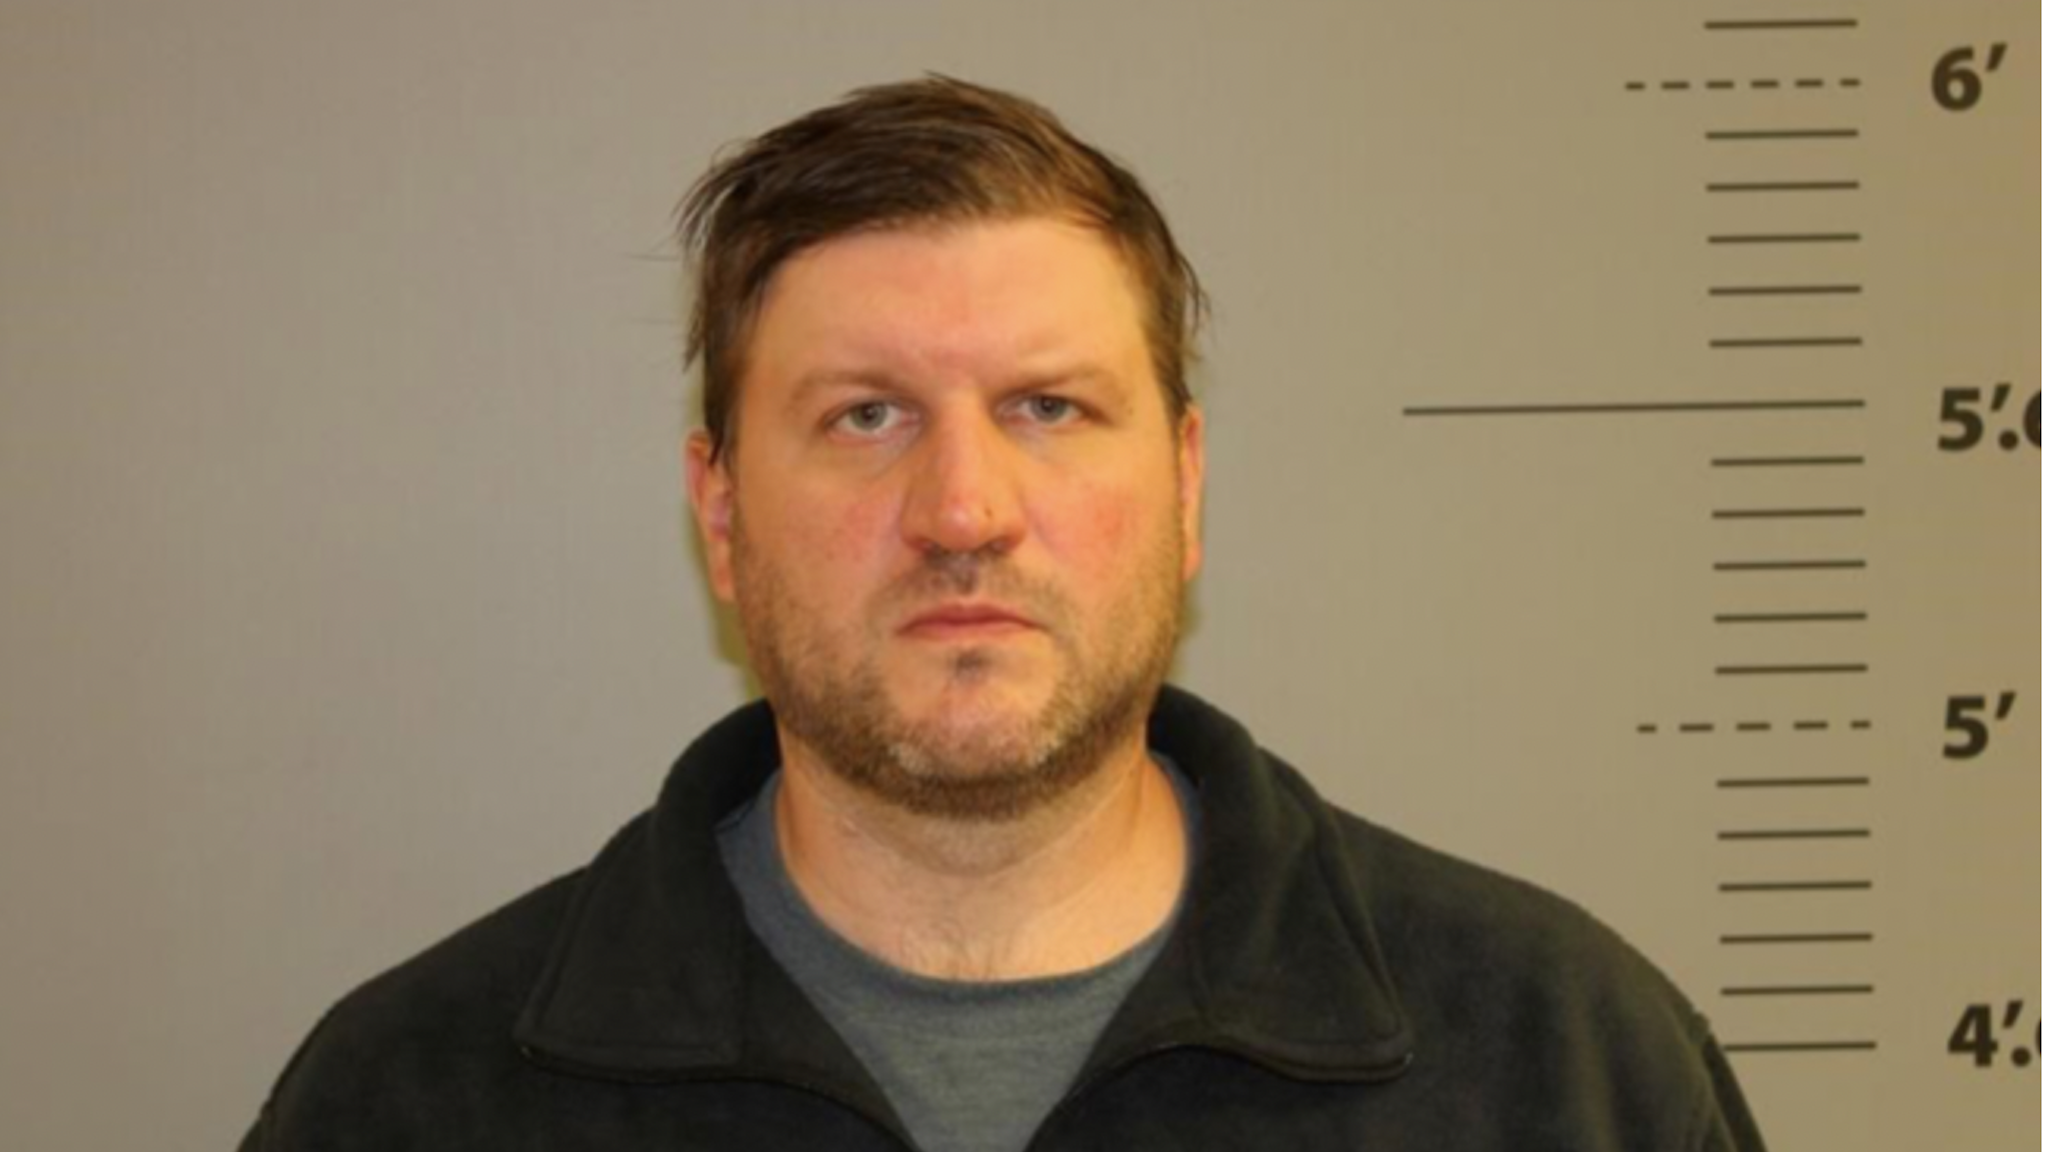 North Dakota prosecutors on Friday leveled a murder charge against Shannon Brandt, the man who allegedly ran down 18-year-old Cayler Ellingson earlier this month because he was a “Republican extremist” and had threatened him.